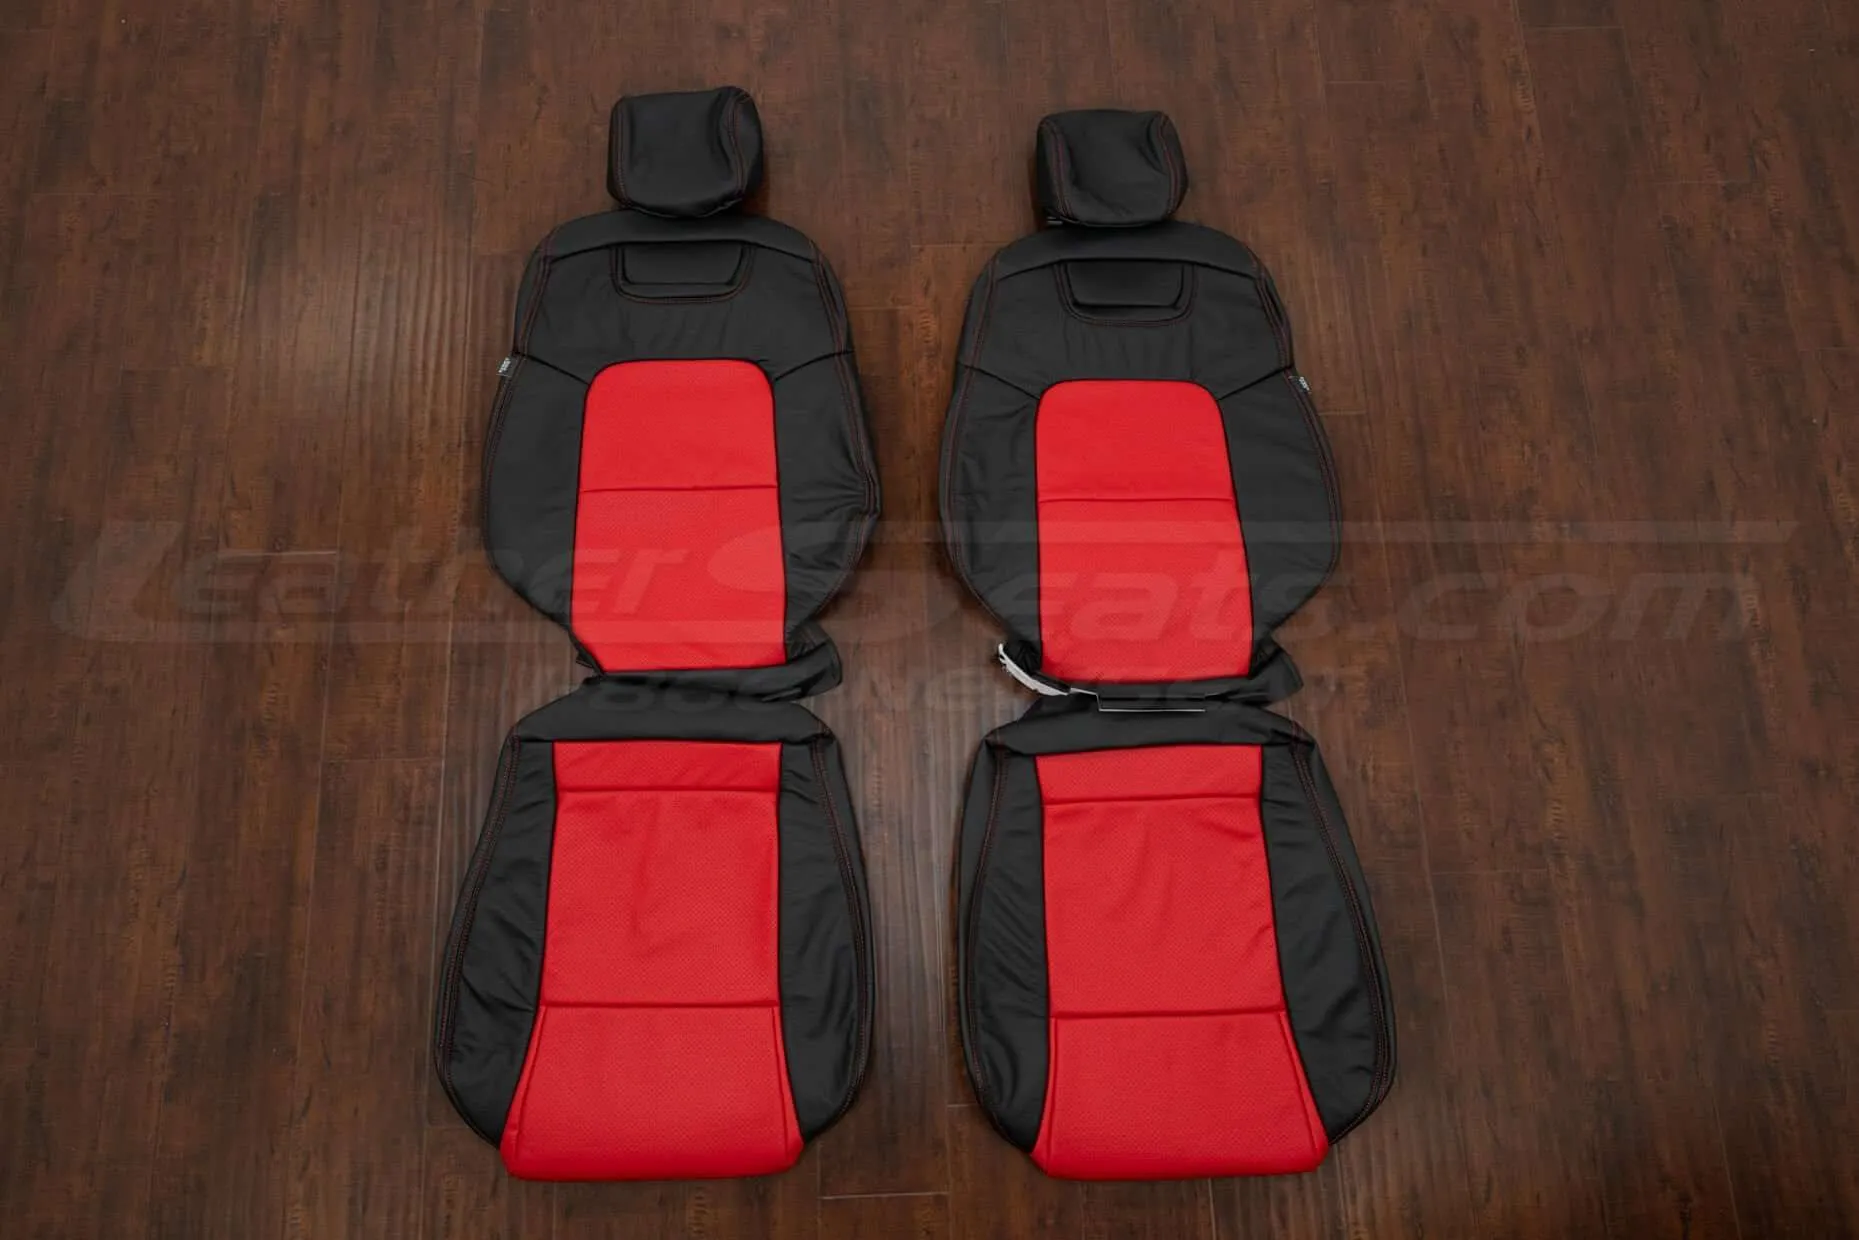 2009 Pontiac G8 GT Leather Seat Upholstery Kit - Black/Bright Red - Front seat upholstery